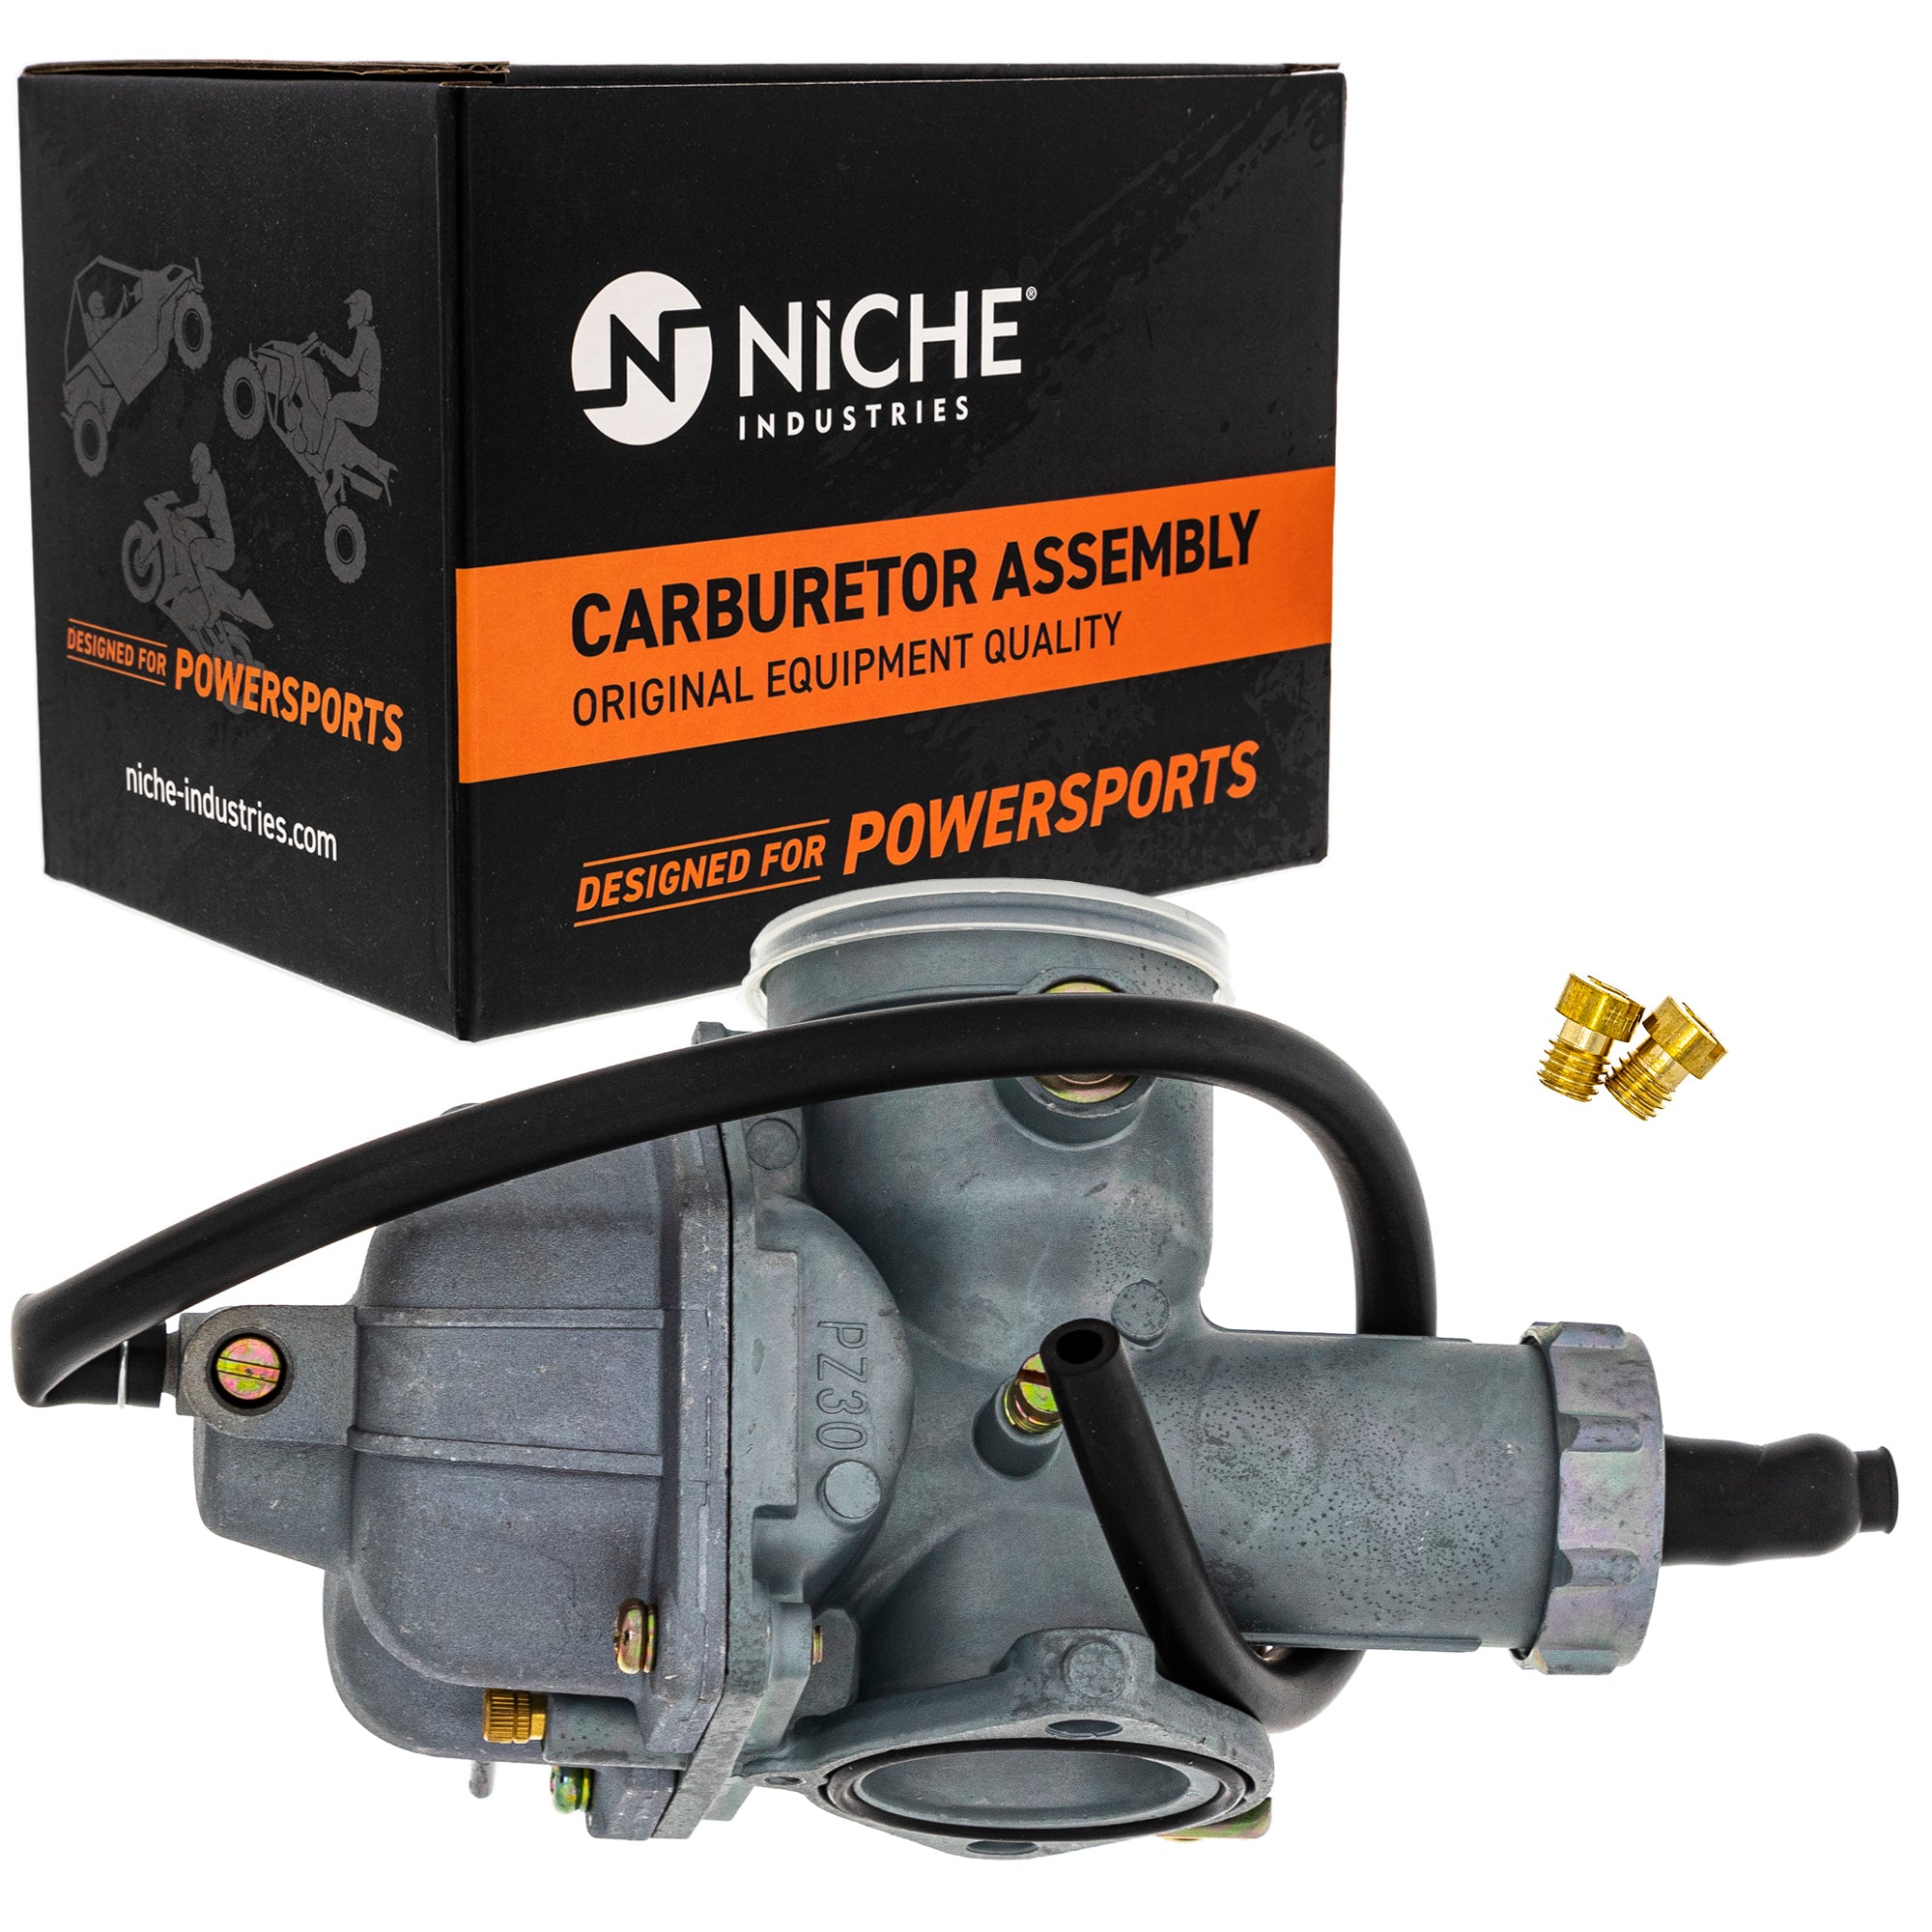 NICHE 519-KCR2240B Carburetor Assembly for zOTHER Twinstar ATC200M